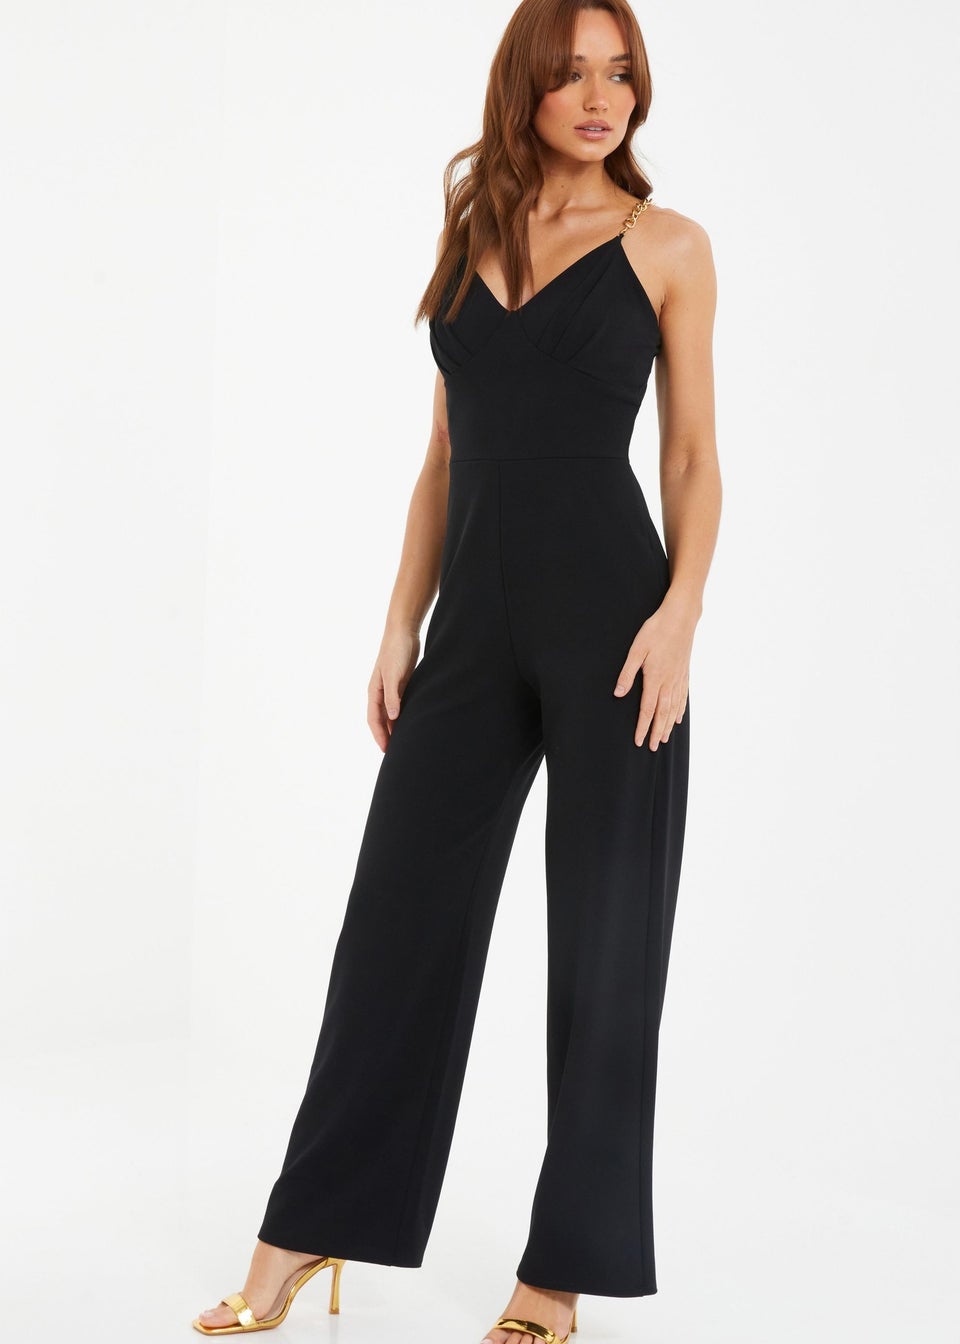 Buy Quiz Clothing Black Slinky Chain Srap Palazzo Jumpsuit (Set of 2) online